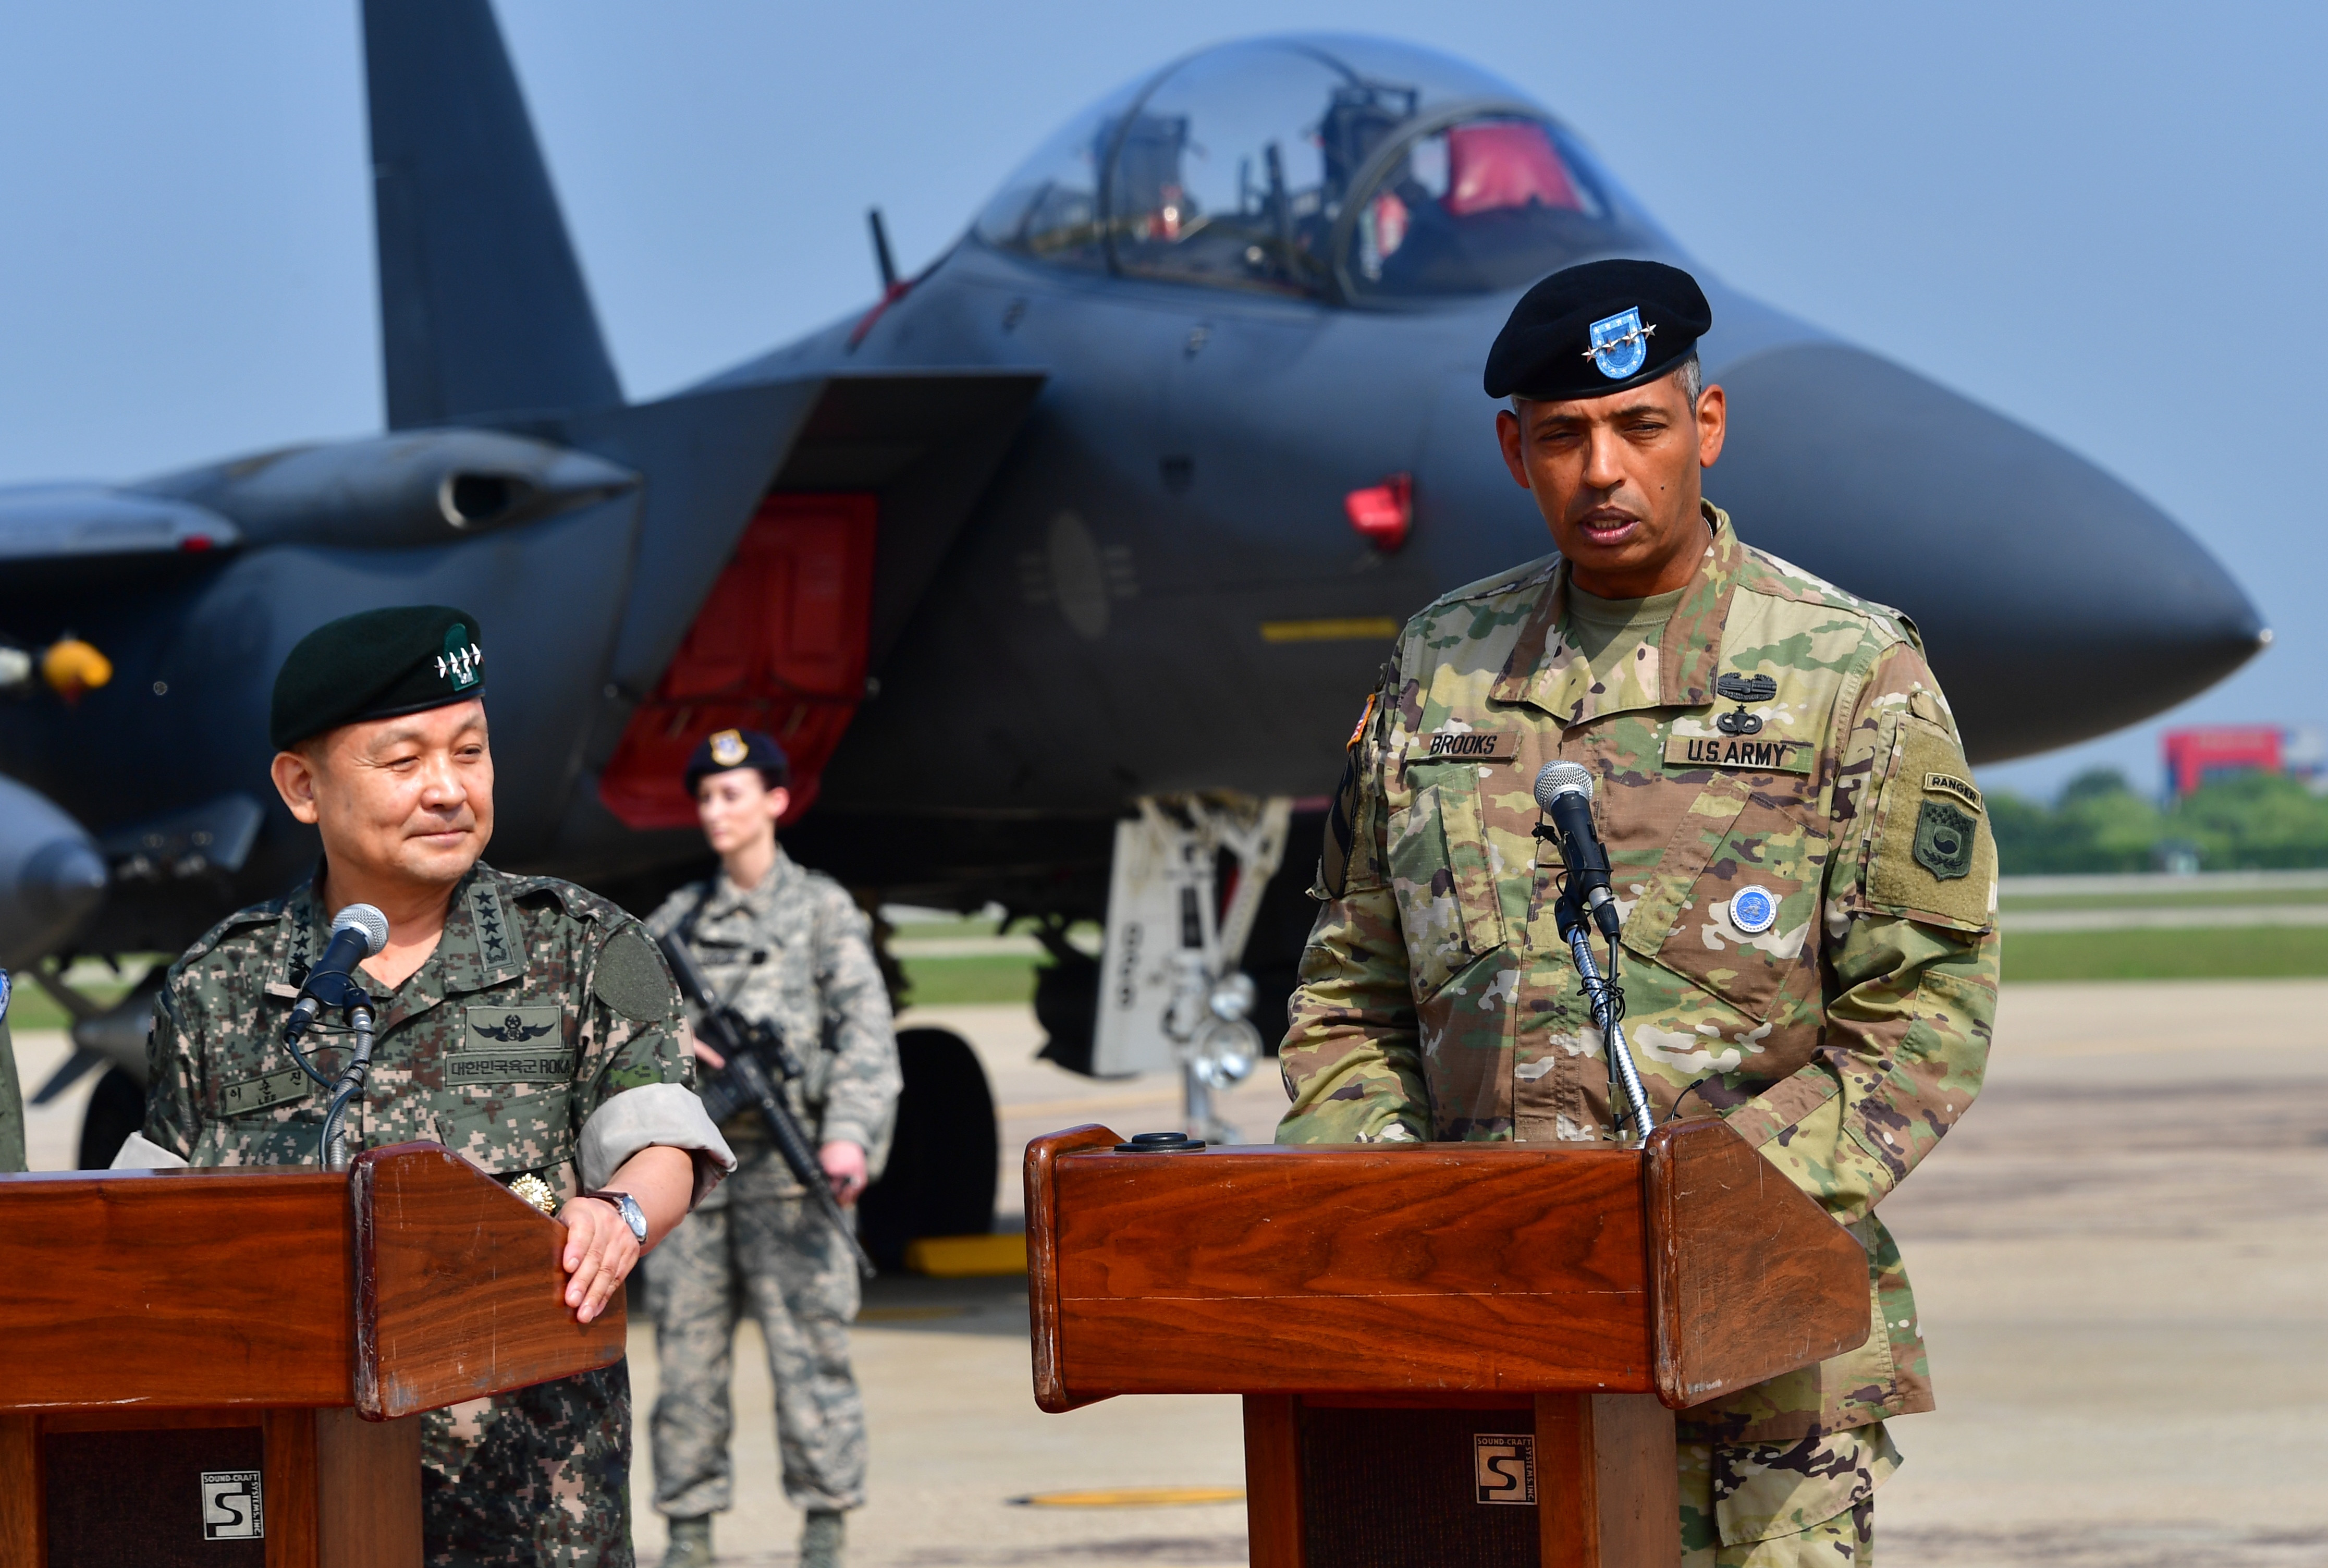 US General Vincent K. Brooks (R), Commander of the United Nations Command, Combined Forces Command and United States Forces Korea speaks as South Korea's Joint Chiefs of Staff chairman General Lee Sun-Jin (L) looks on during a press briefing on the flight by US B-1B Lancer over South Korea at the Osan Air Base in Pyeongtaek on September 13, 2016. / AFP PHOTO / JUNG YEON-JE